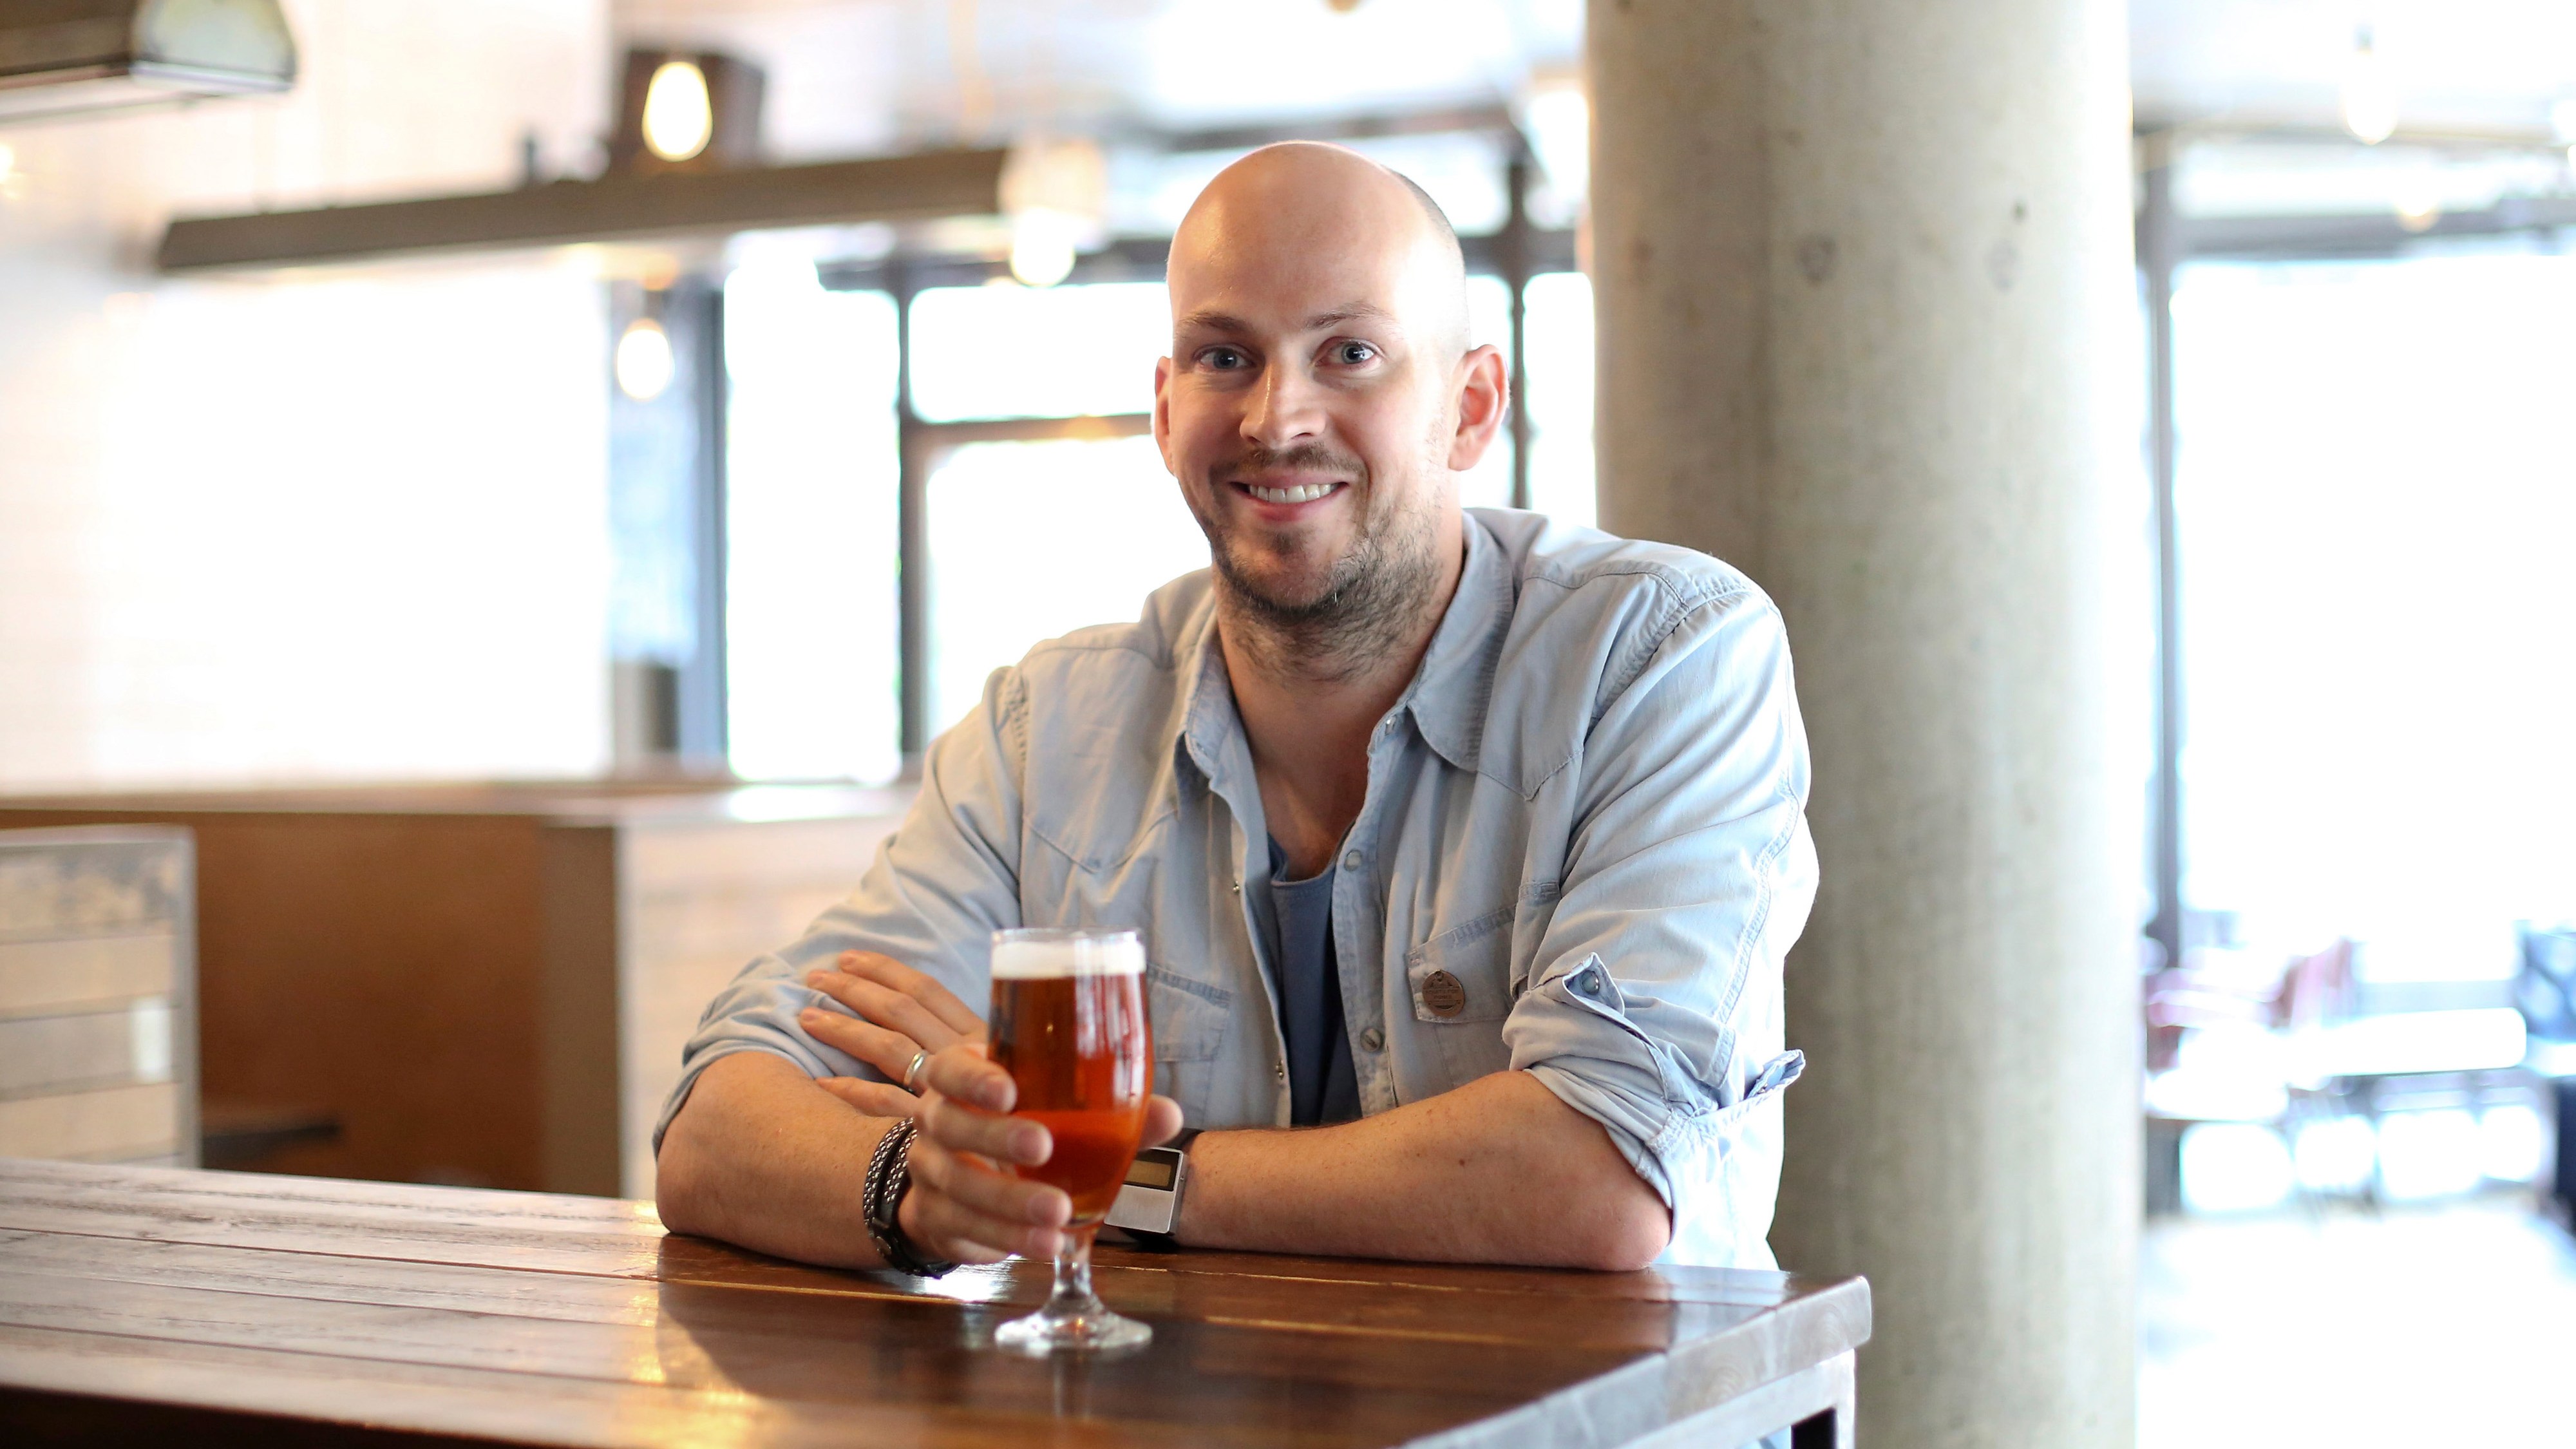 James Watt announced he was stepping down from his role at BrewDog last month, 17 years after founding the company